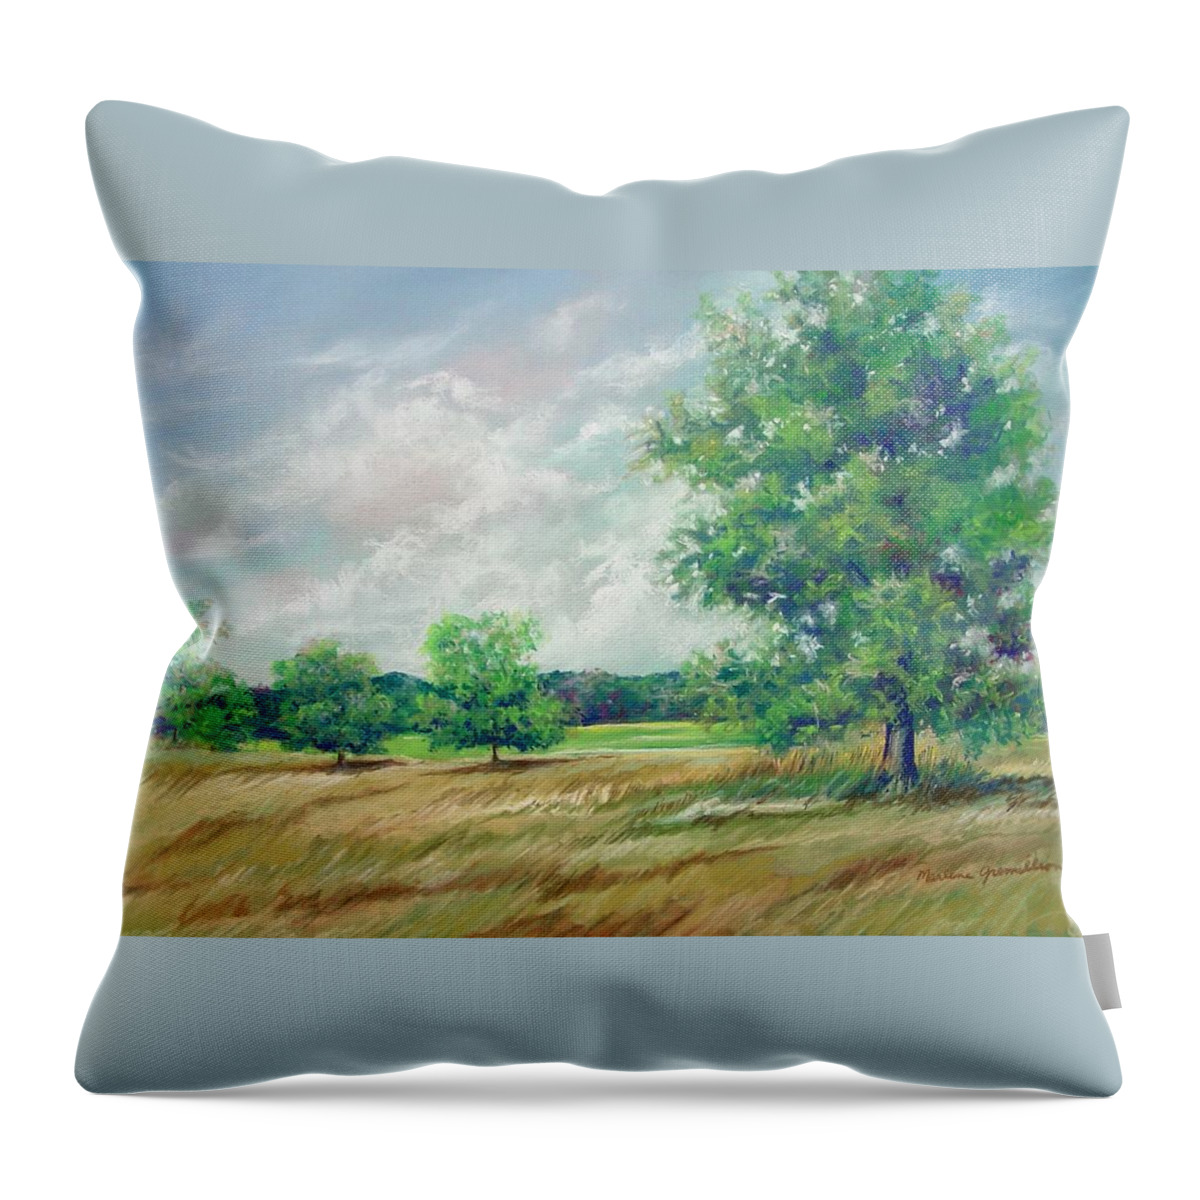 Pastel Throw Pillow featuring the painting Serenity by Marlene Gremillion